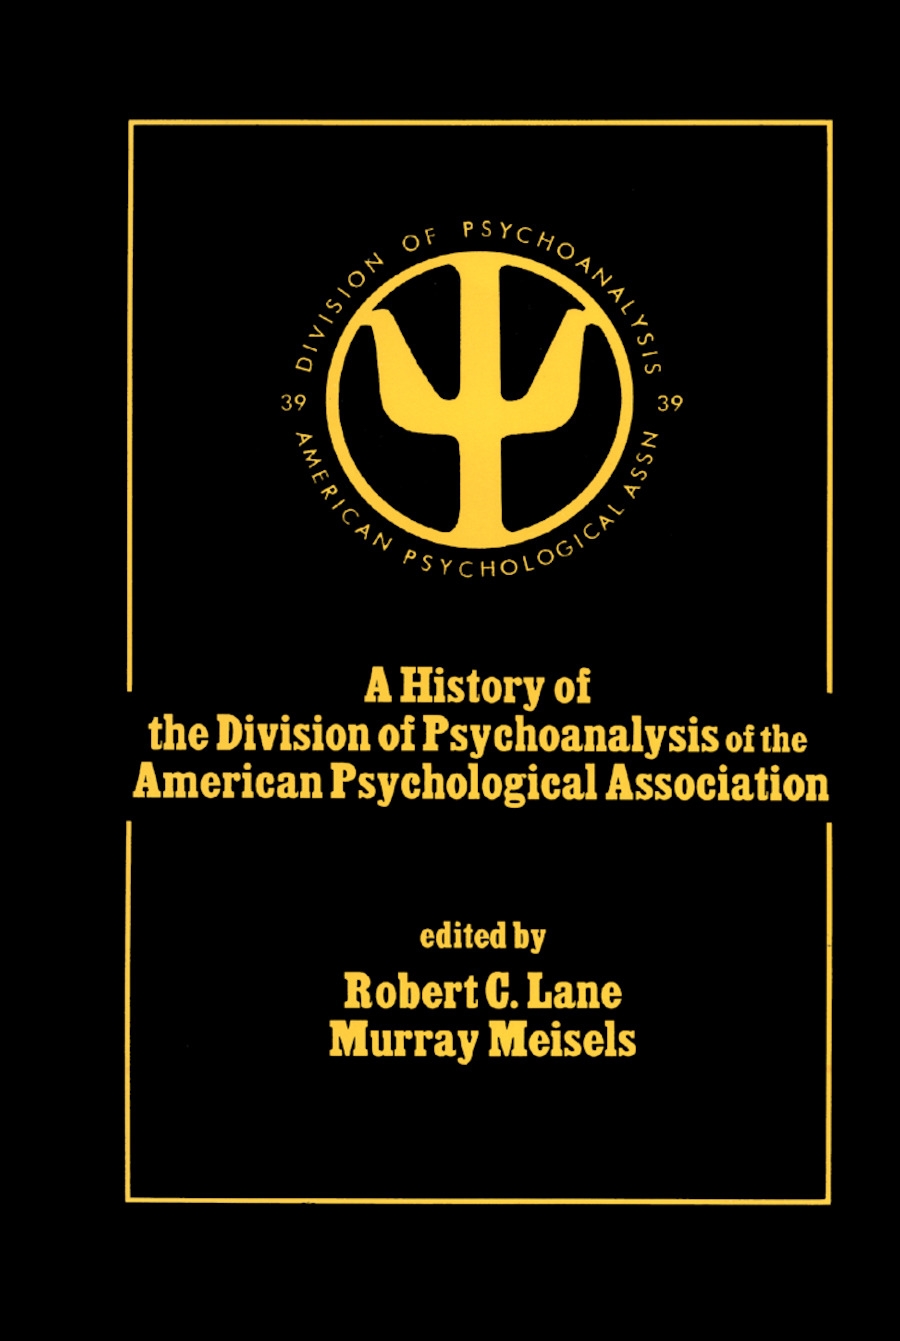 A History of the Division of Psychoanalysis of the American Psychological Association